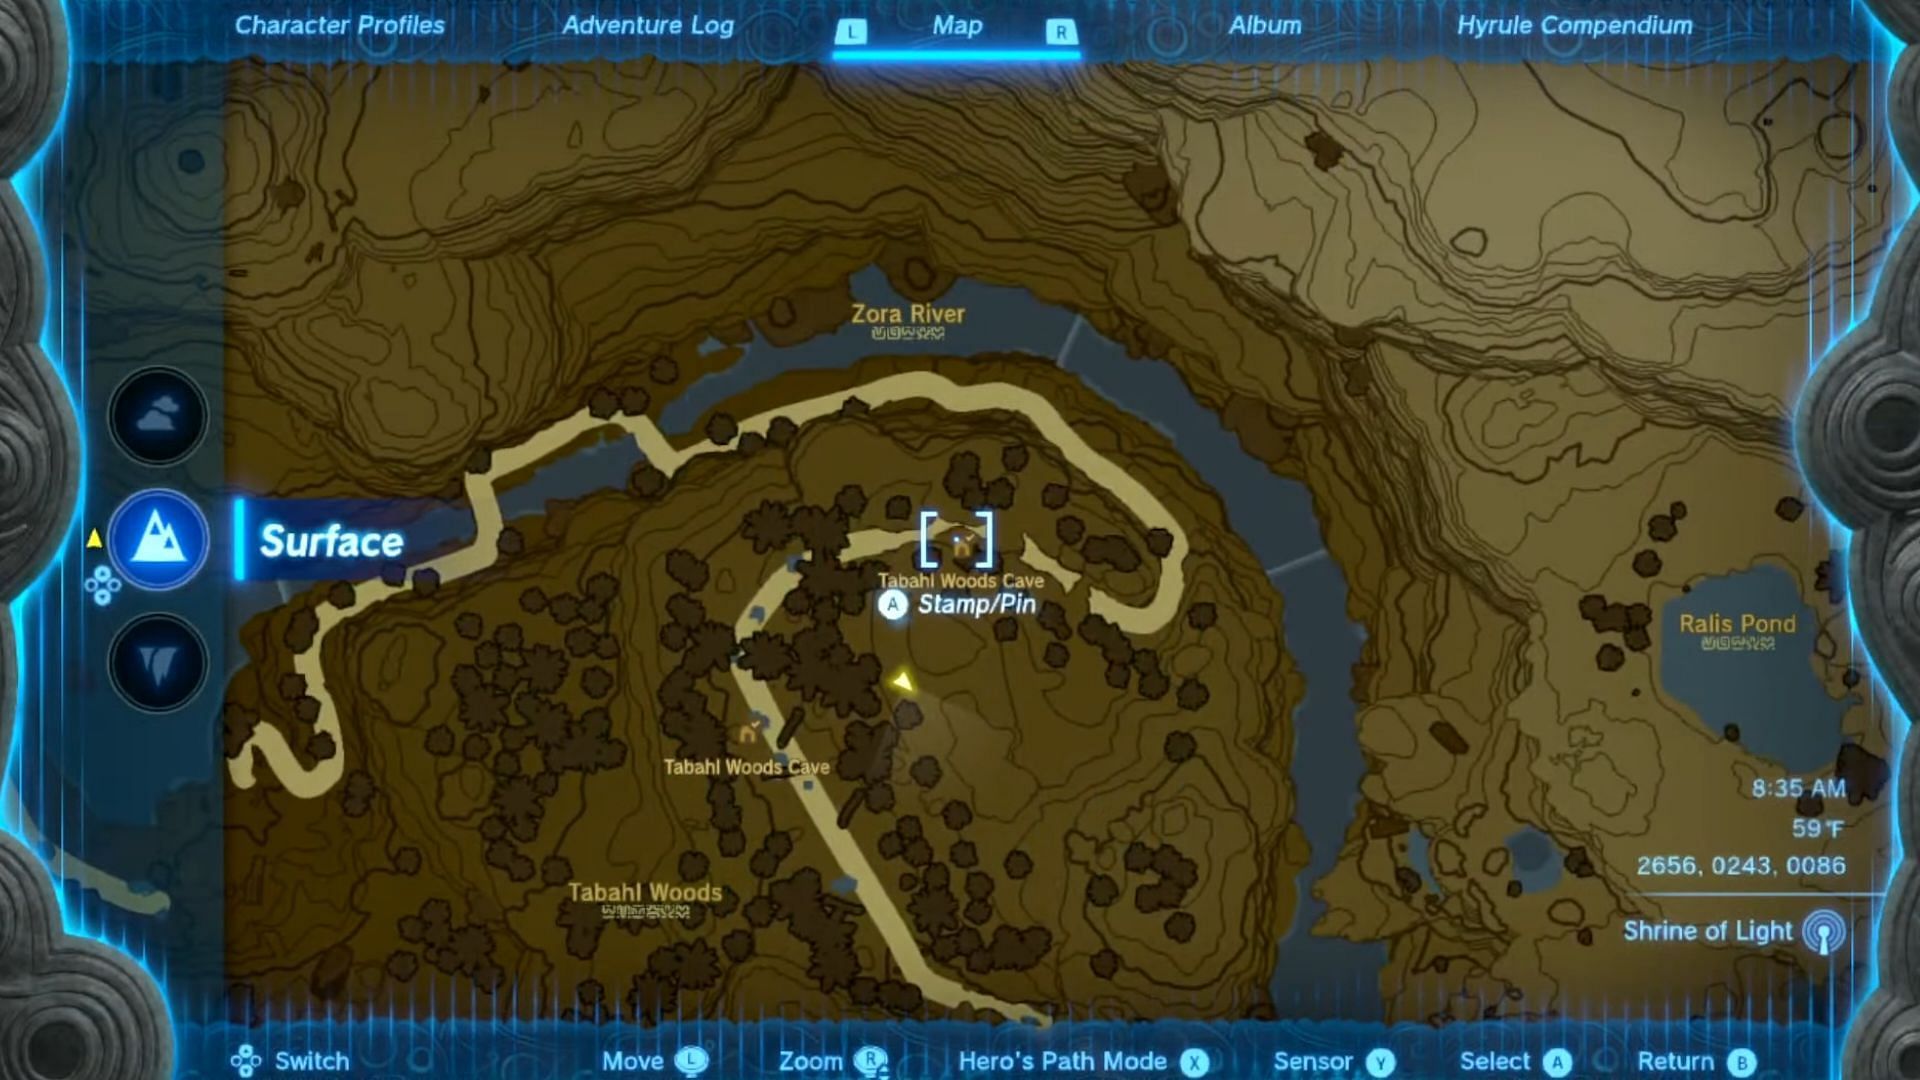 You can head to the Tabahl Woods Cave to obtain the Zora Spear (Image via Nintendo)